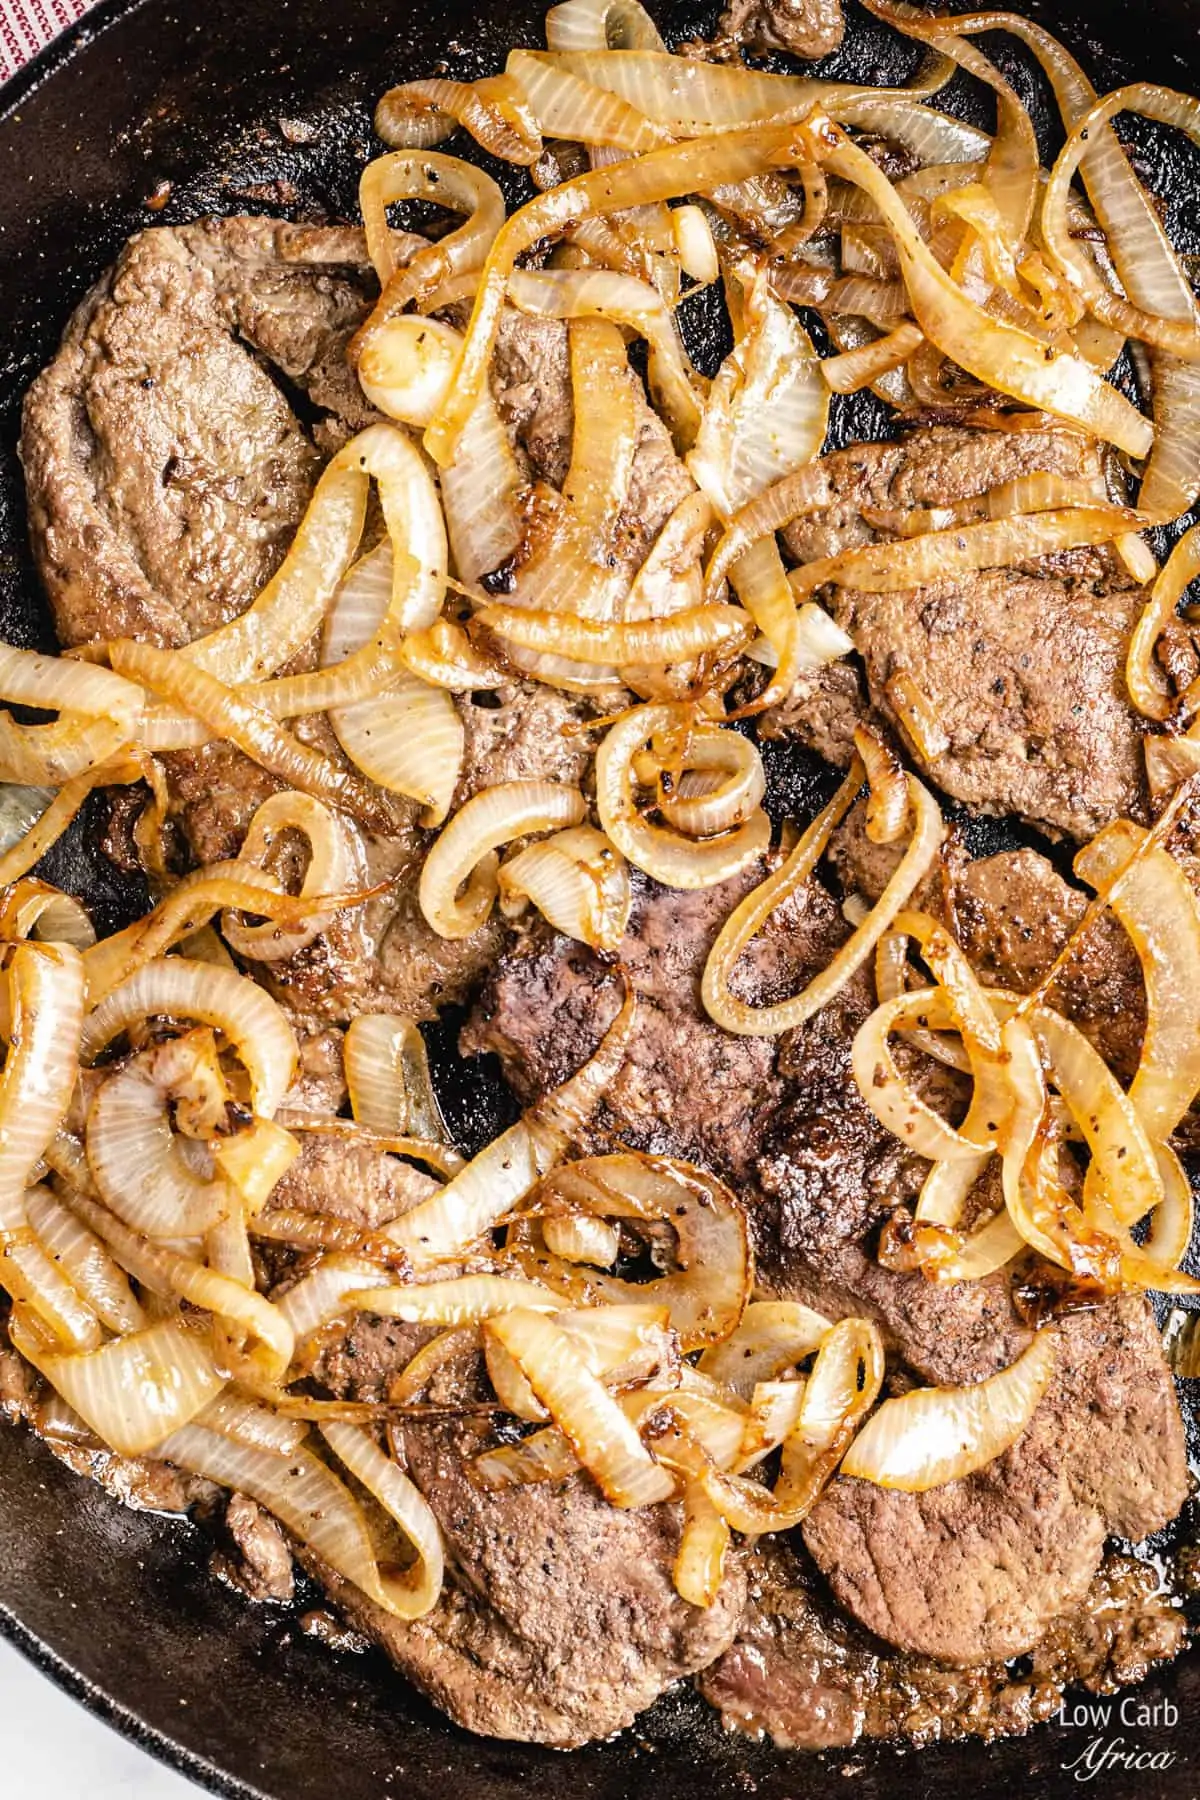 Recipe for liver and onions using a cast iron skillet.